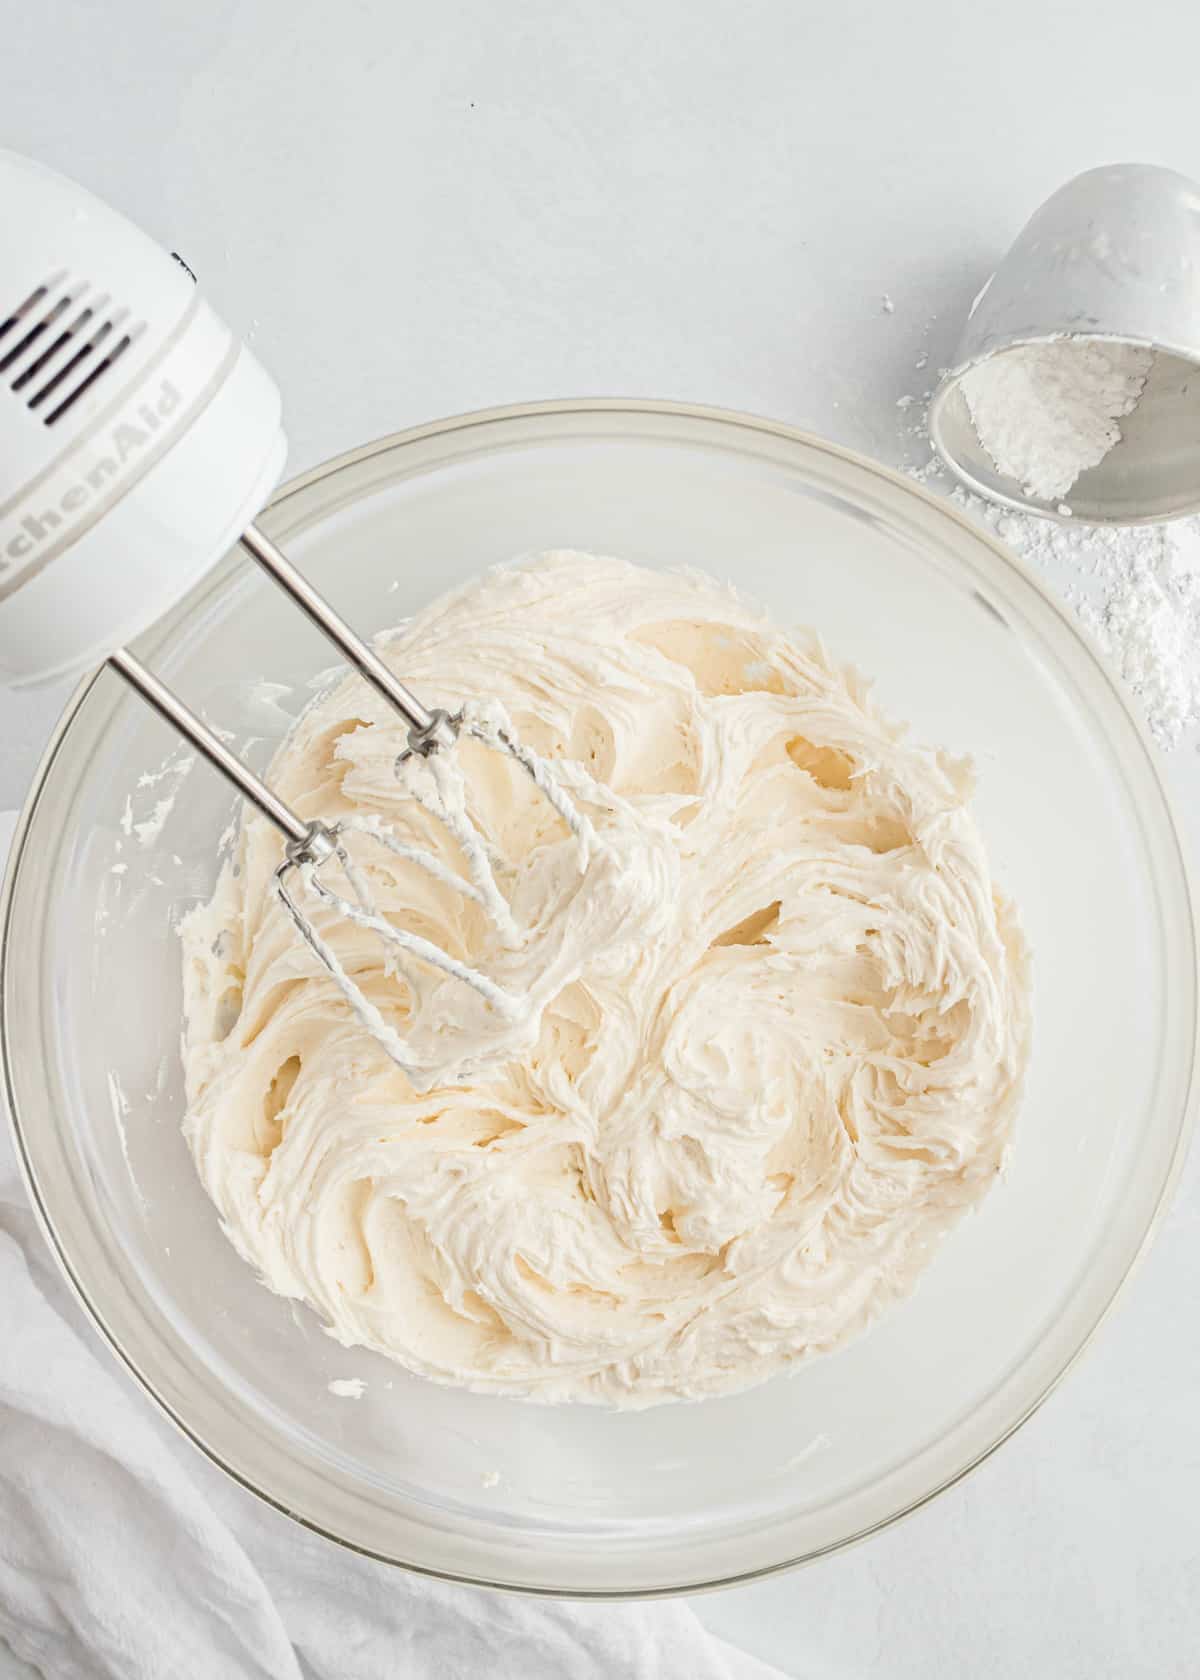 Mixing buttercream frosting in glass bowl.